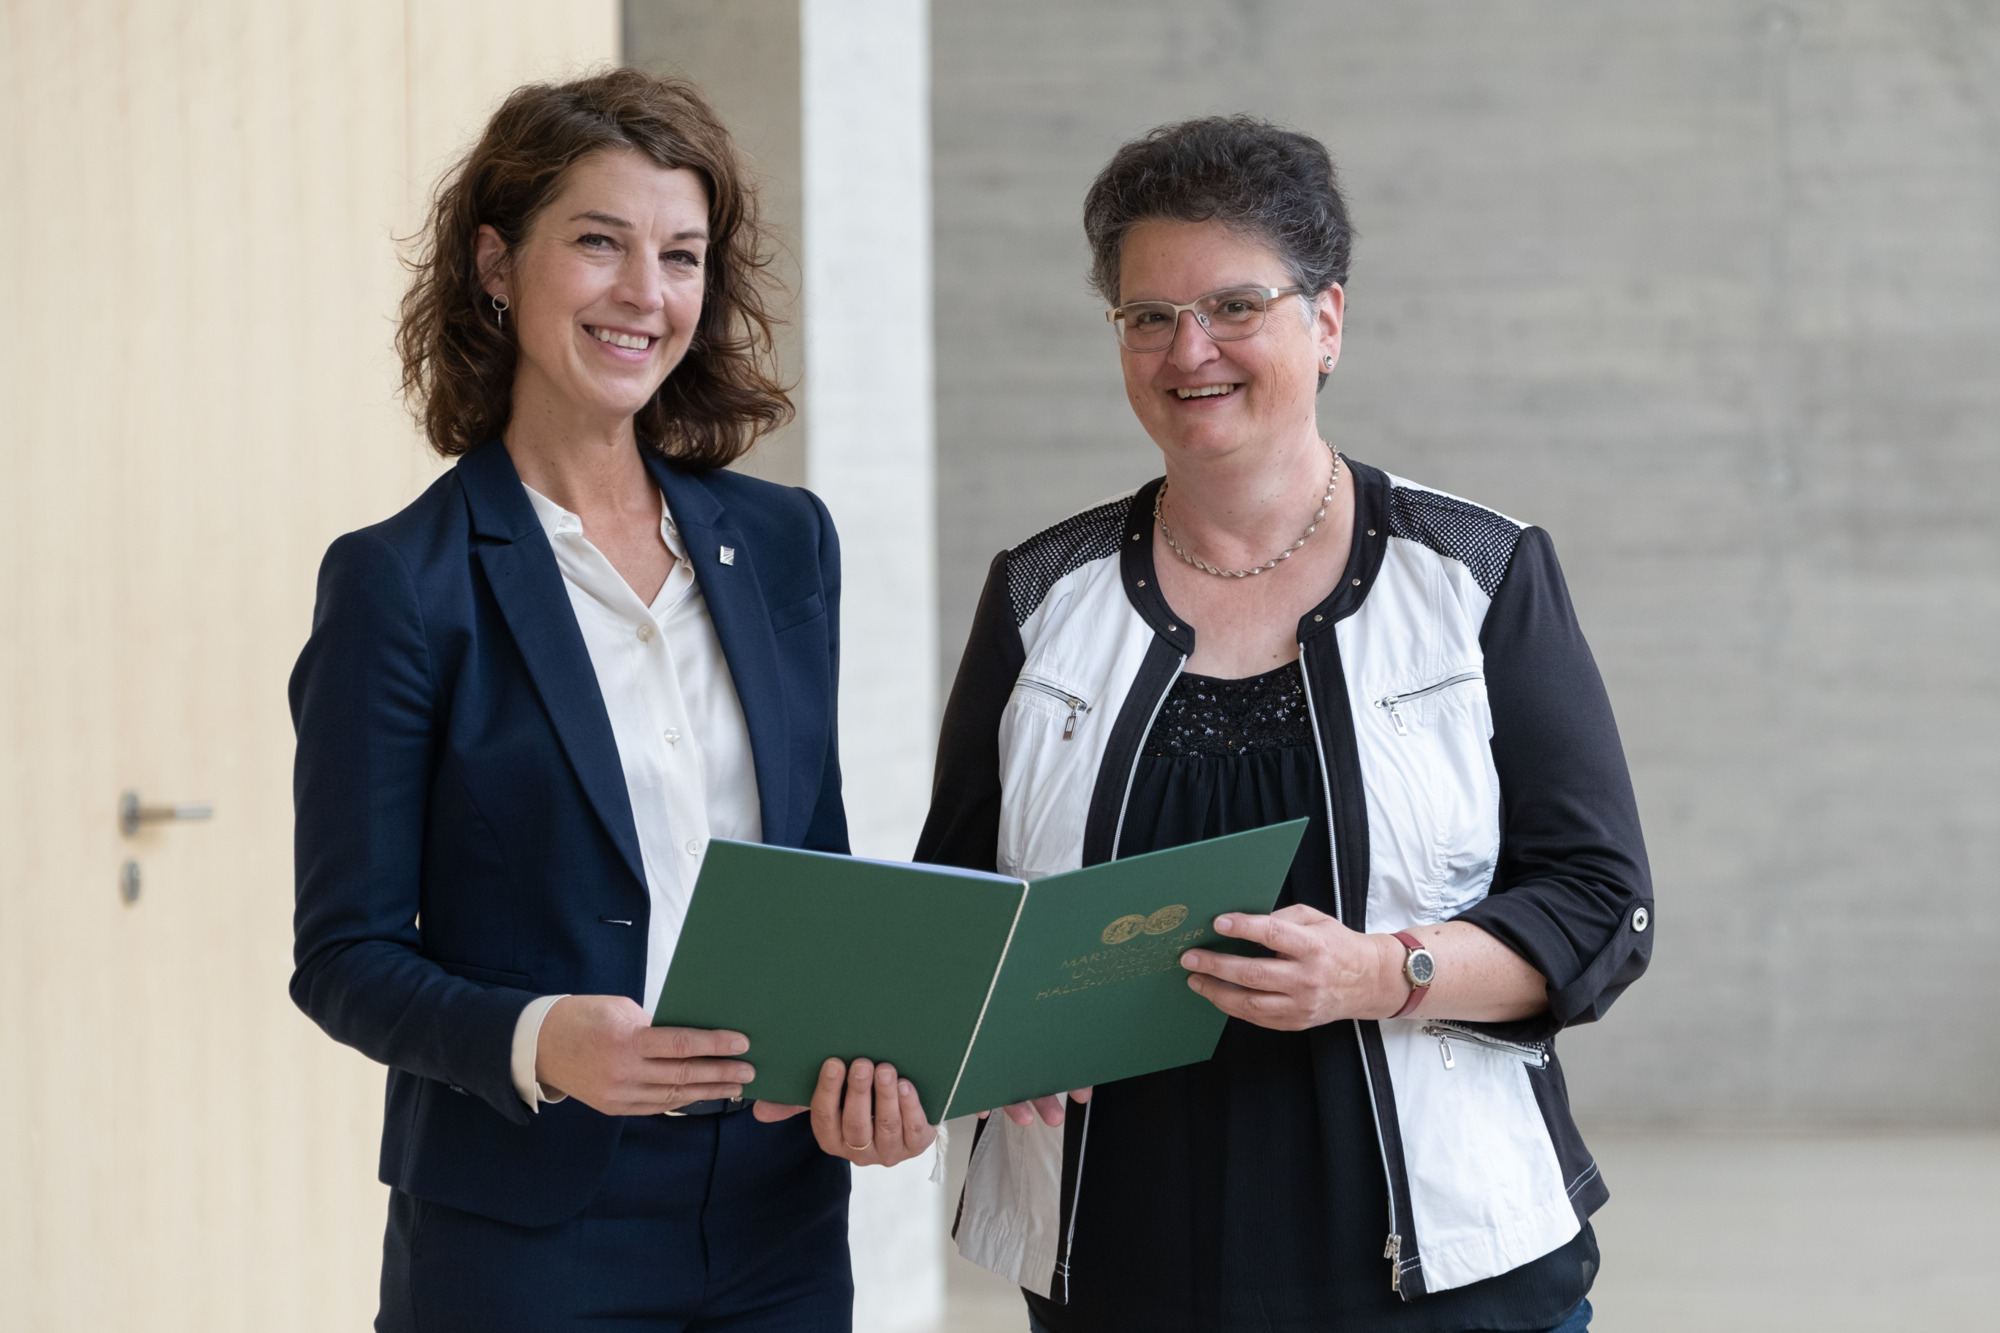 Erica Lilleodden takes up professorship at Martin Luther University ...